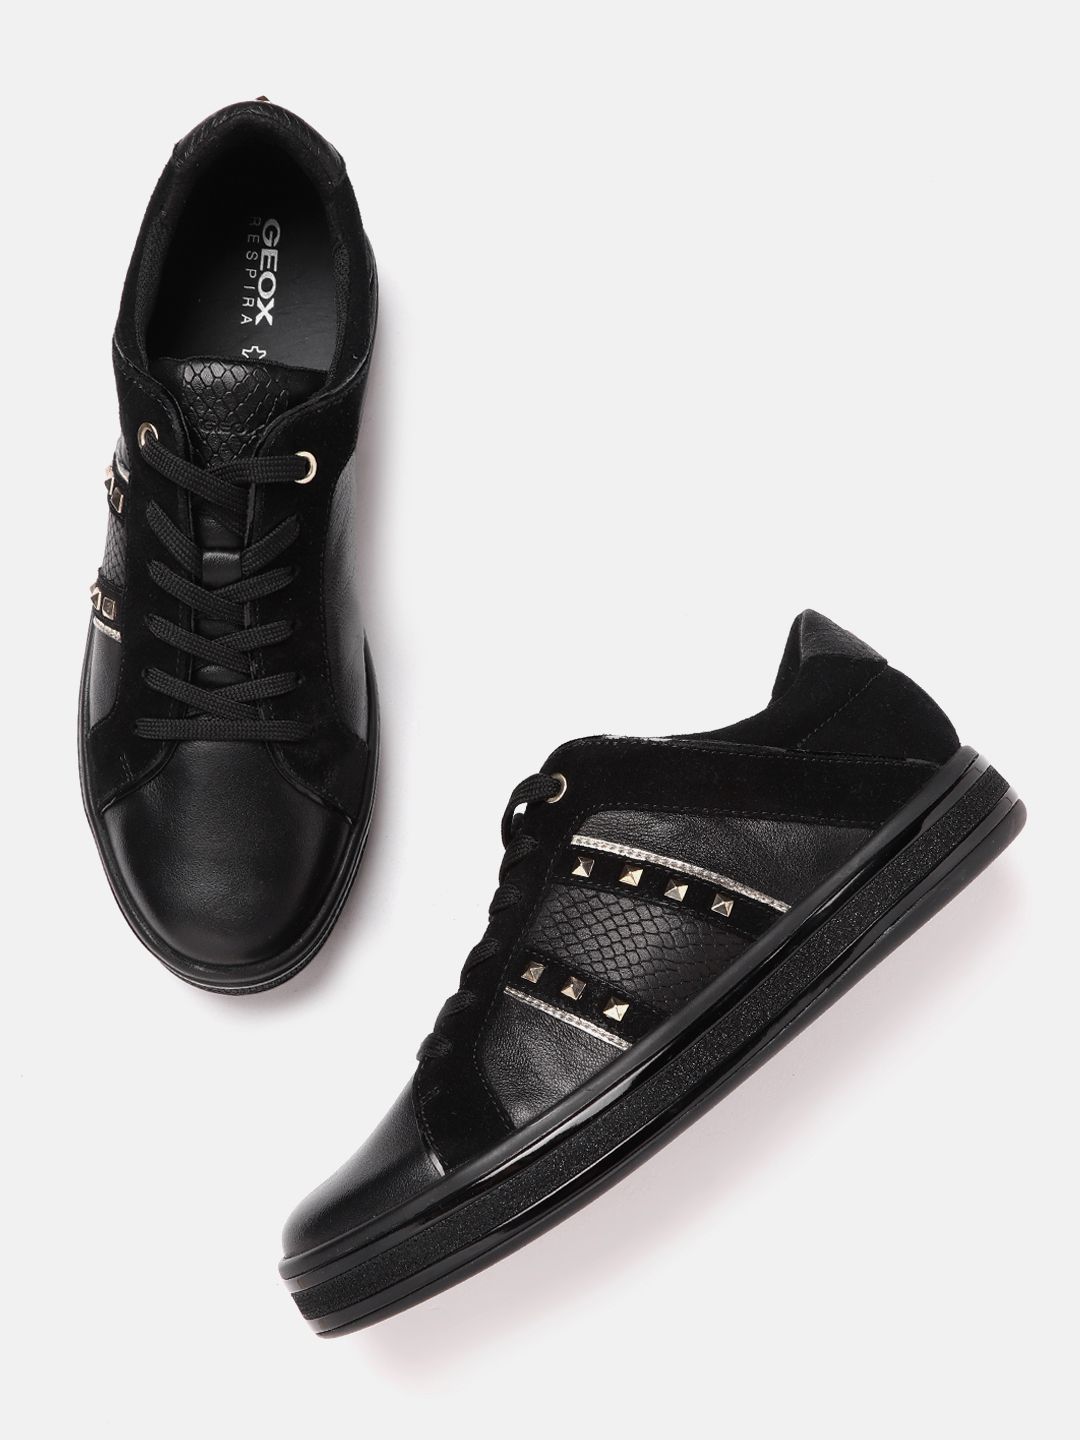 Geox Women Black Leather Sneakers Price in India